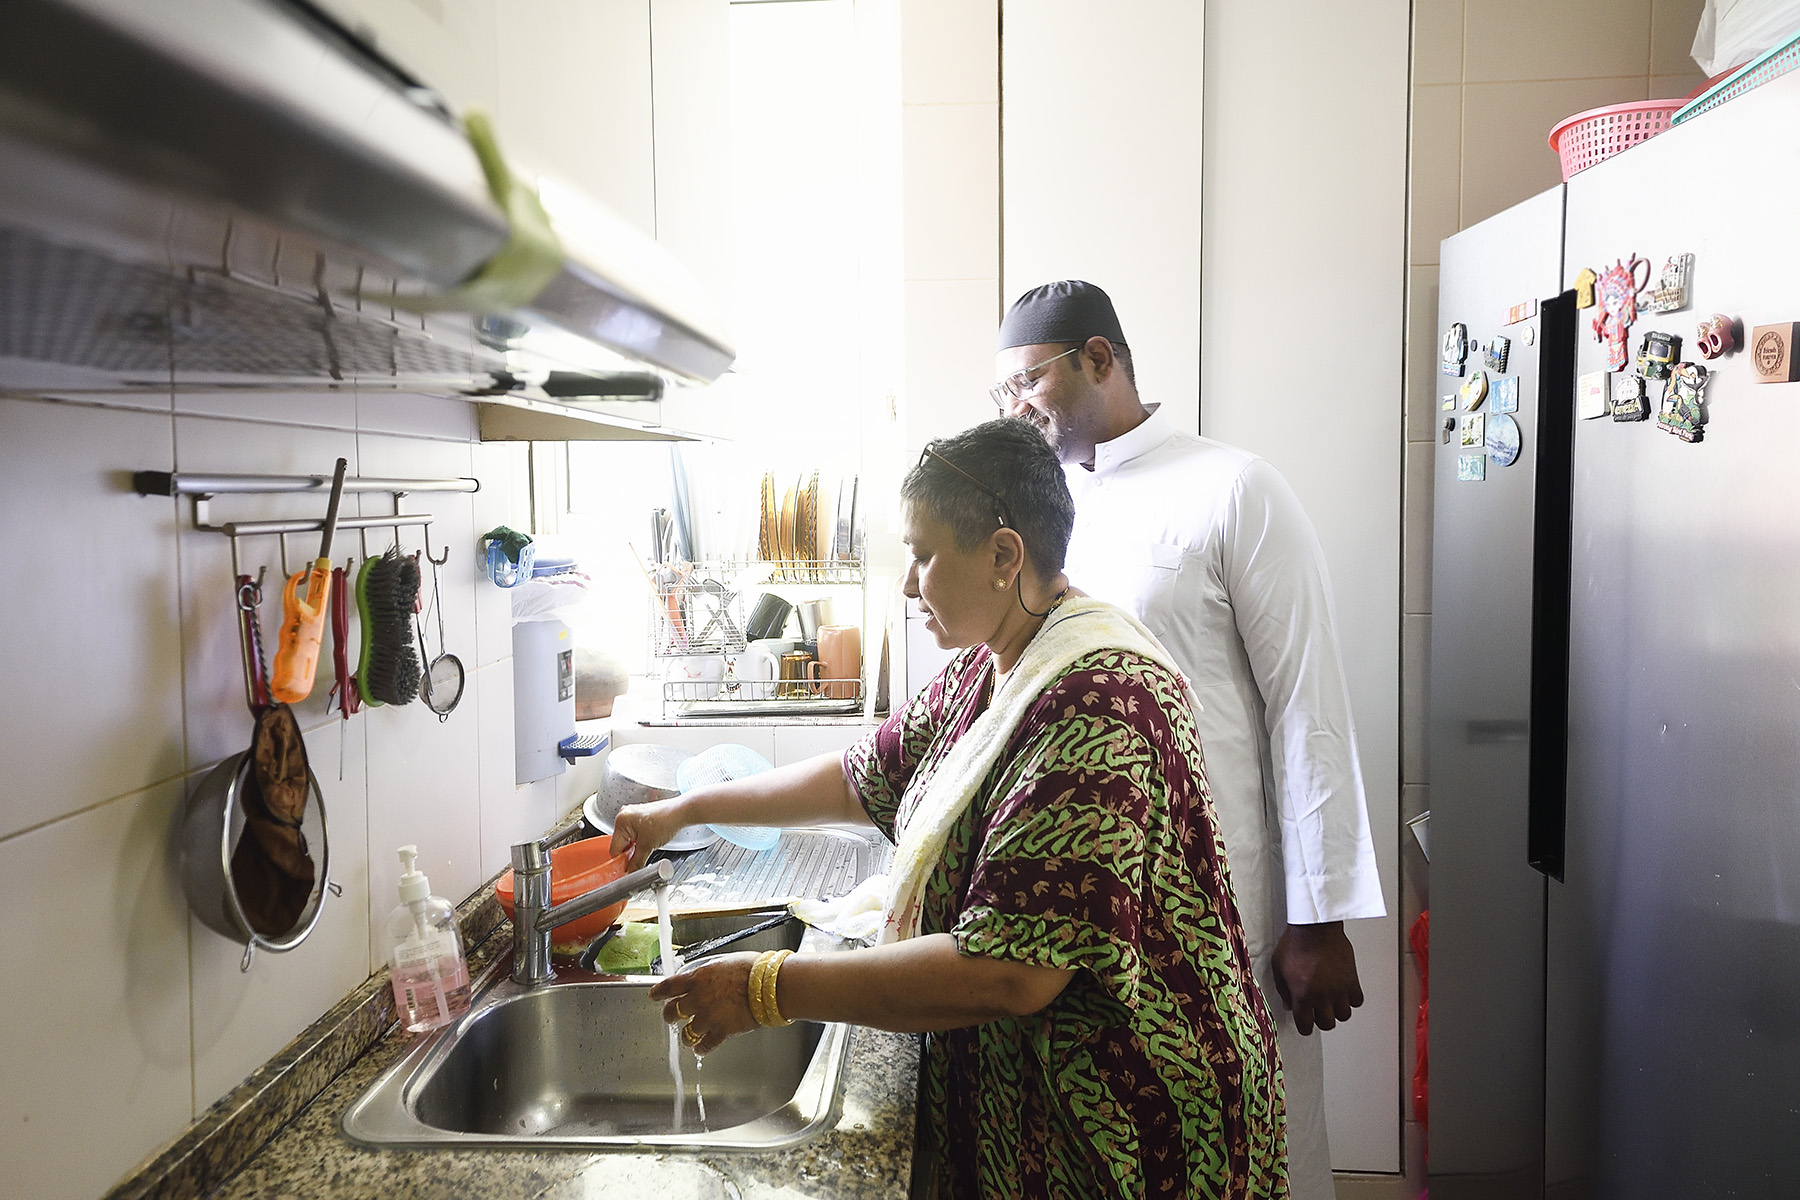 Mother is washing the dishes in a kitchen, while her grown-up son is laughing and doing nothing.